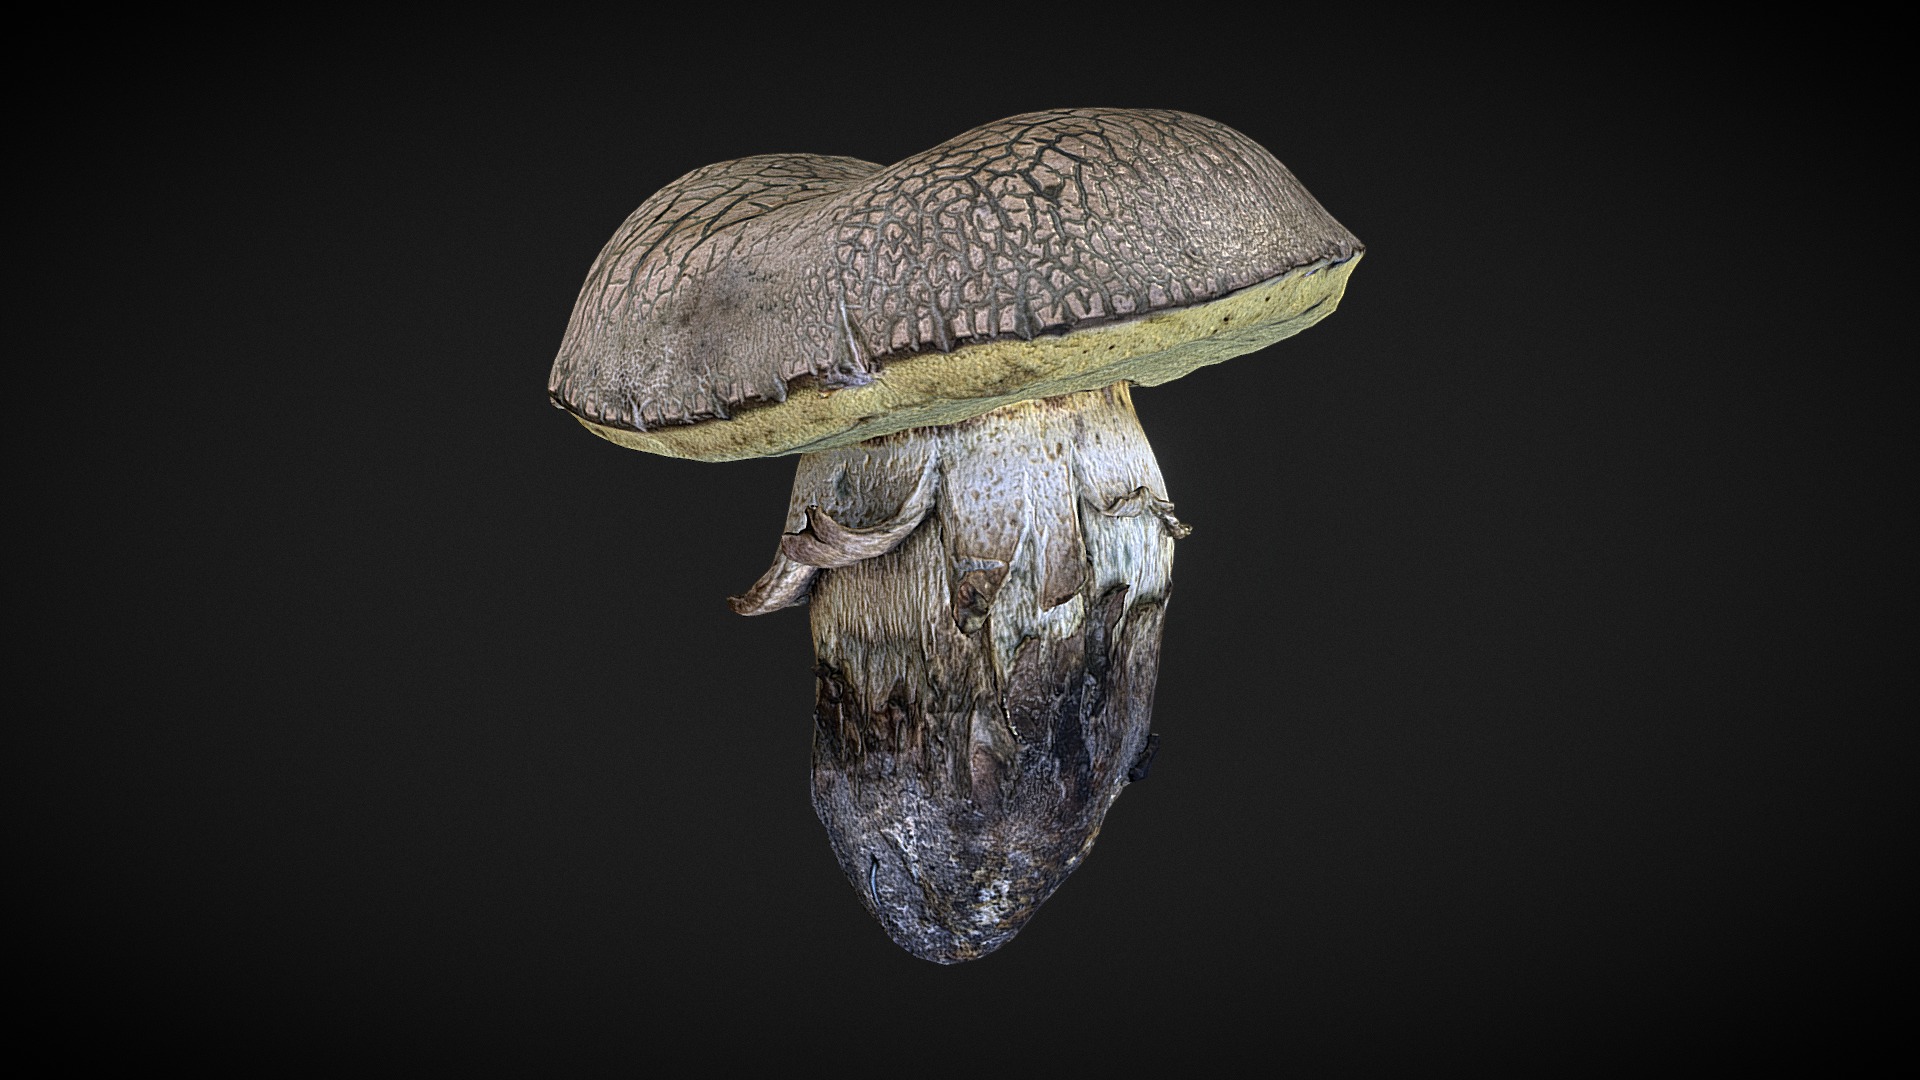 3D model mushroom 15 - This is a 3D model of the mushroom 15. The 3D model is about a snail with a long tail.